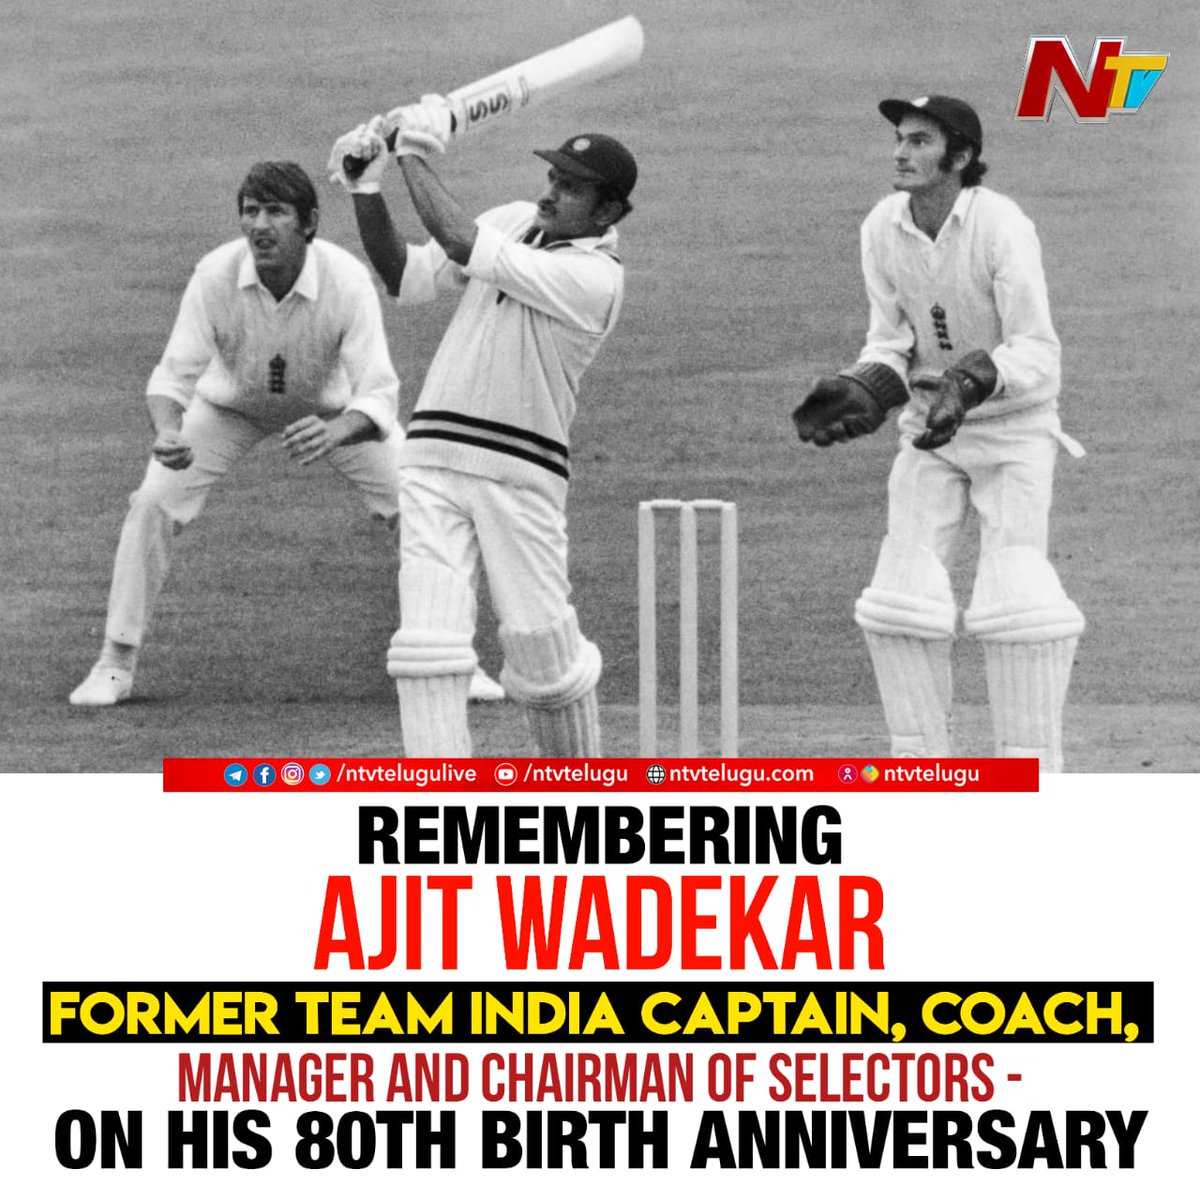 Remembering #AjitWadekar - former #TeamIndia captain, coach, manager and chairman of selectors - on his 80th birth anniversary. 🙏🙏

#NtvSports #NtvLive #NtvTelugu #NtvNews